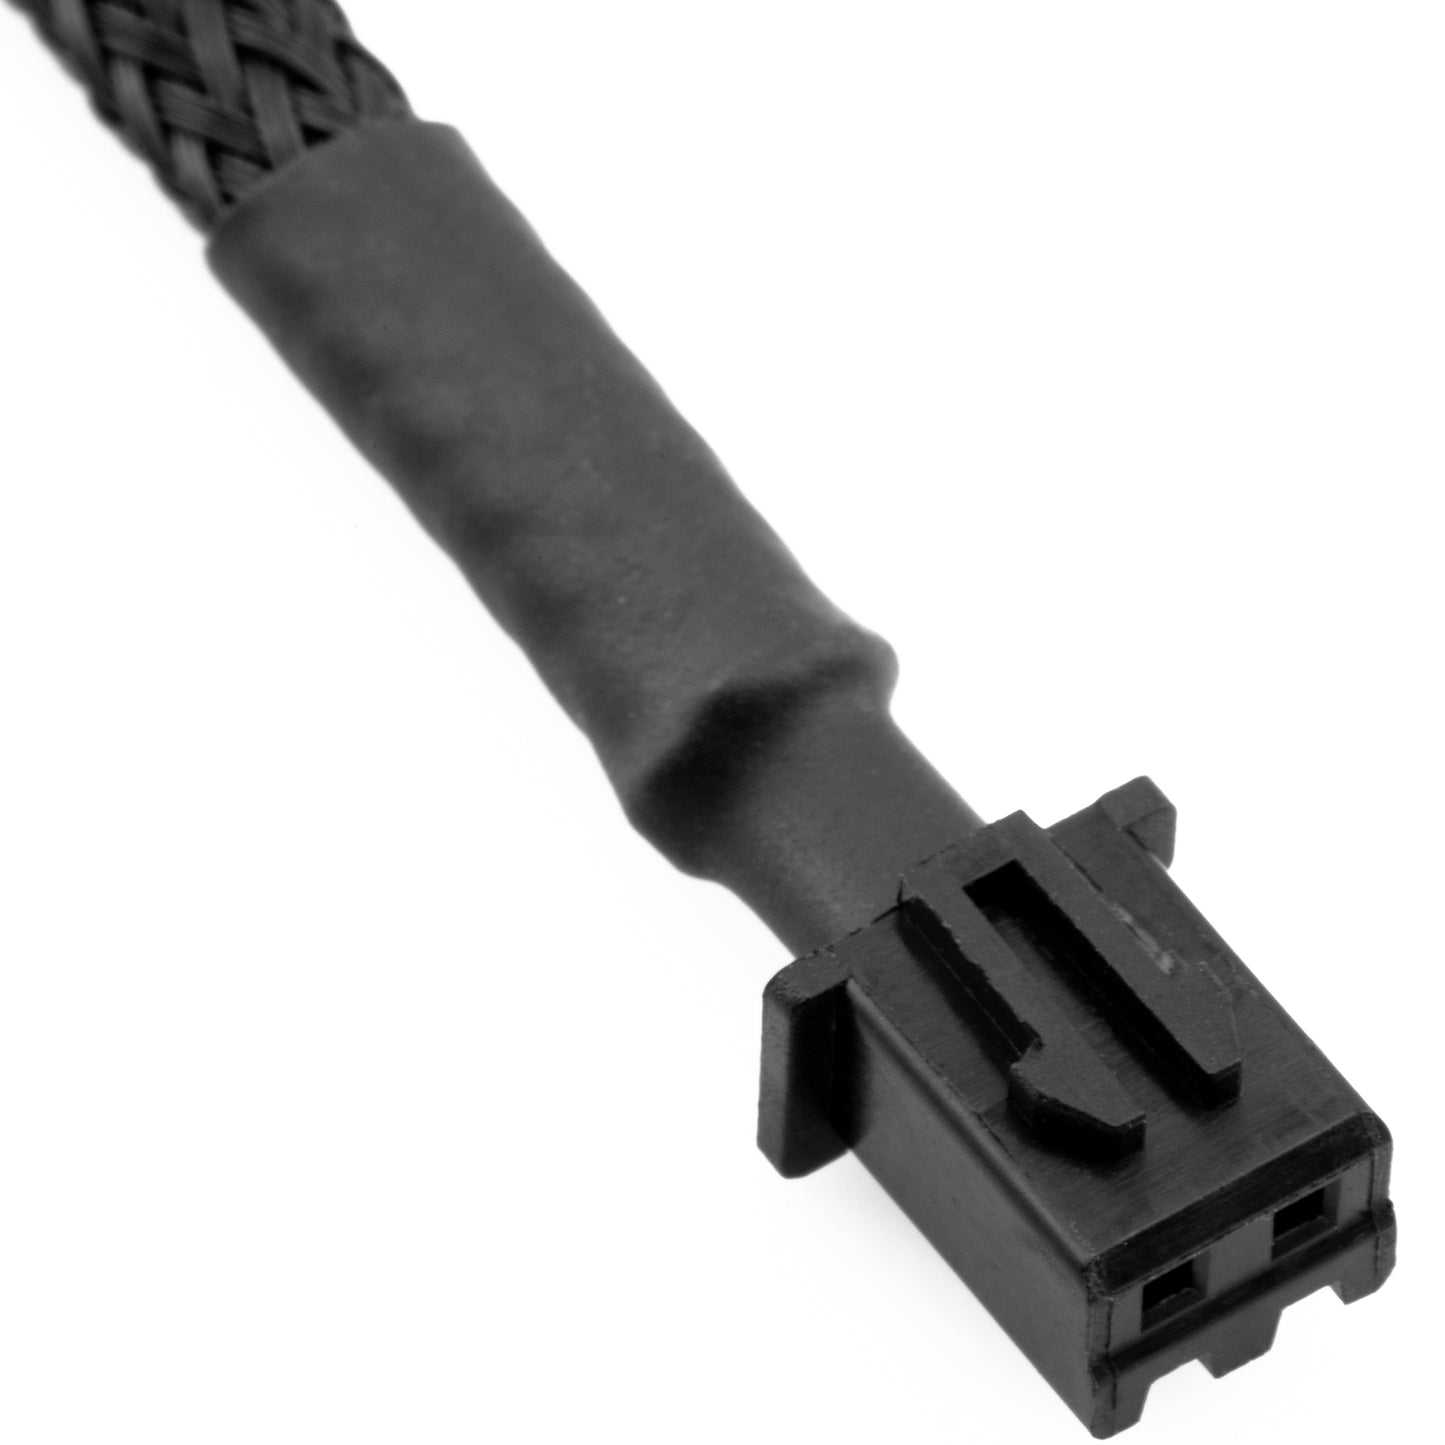 Mini XH 2-Pin to 4-Pin PC Fan Adapter Cables 2-Pack